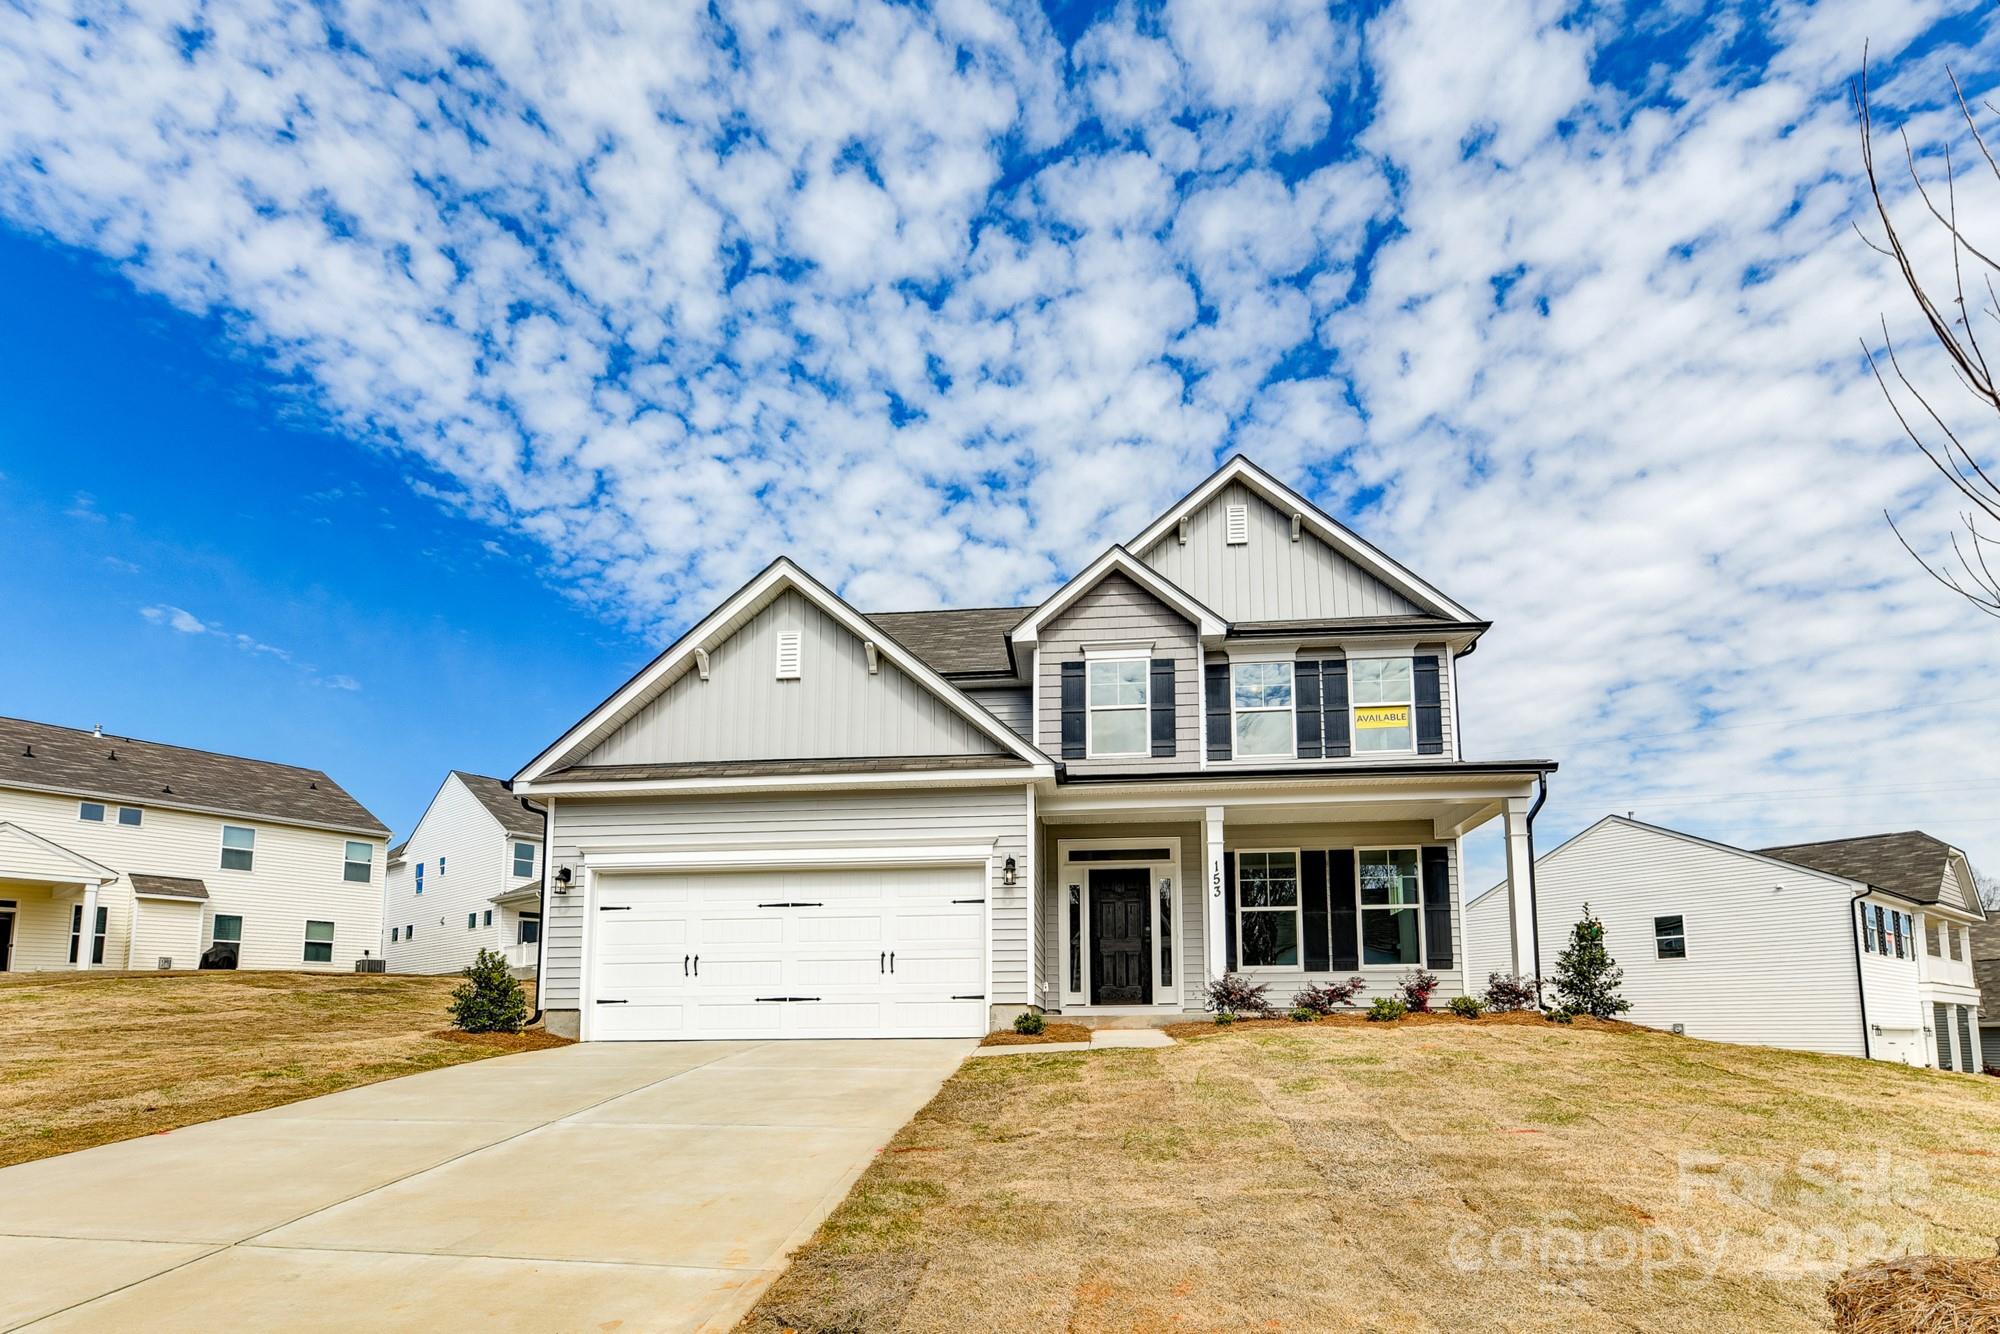 Photo one of 153 Cotton Field Dr # 25 Statesville NC 28677 | MLS 4127779